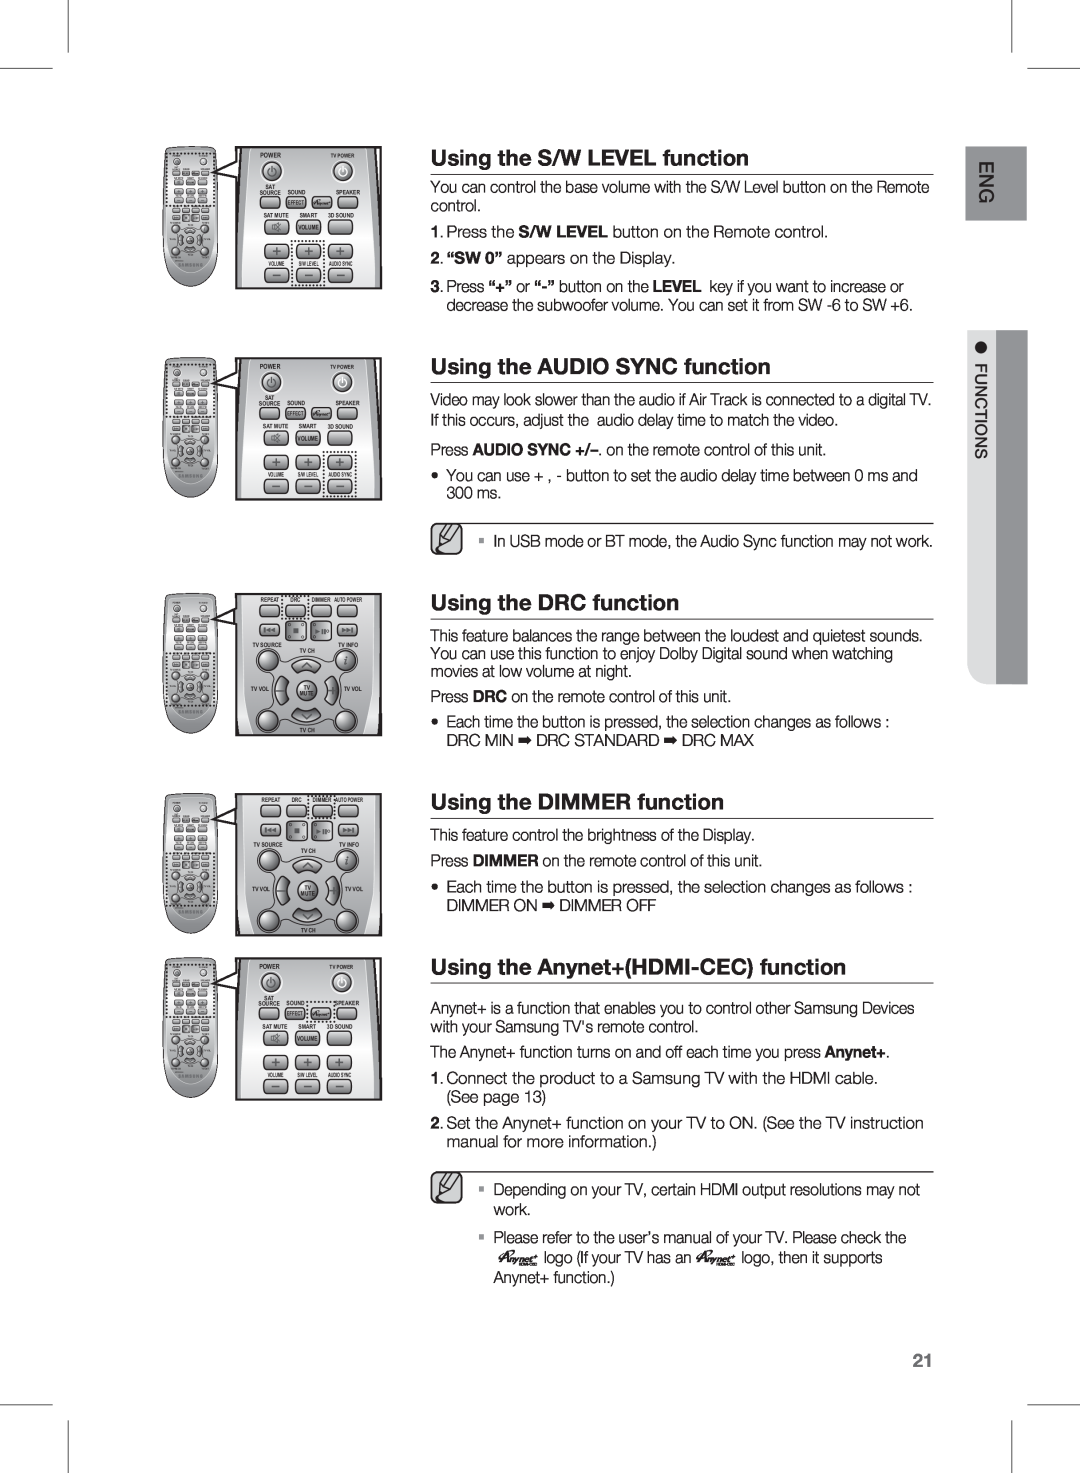 Samsung HW-E450 user manual Using the S/W LEVEL function, Using the AUDIO SYNC function, Using the DRC function 